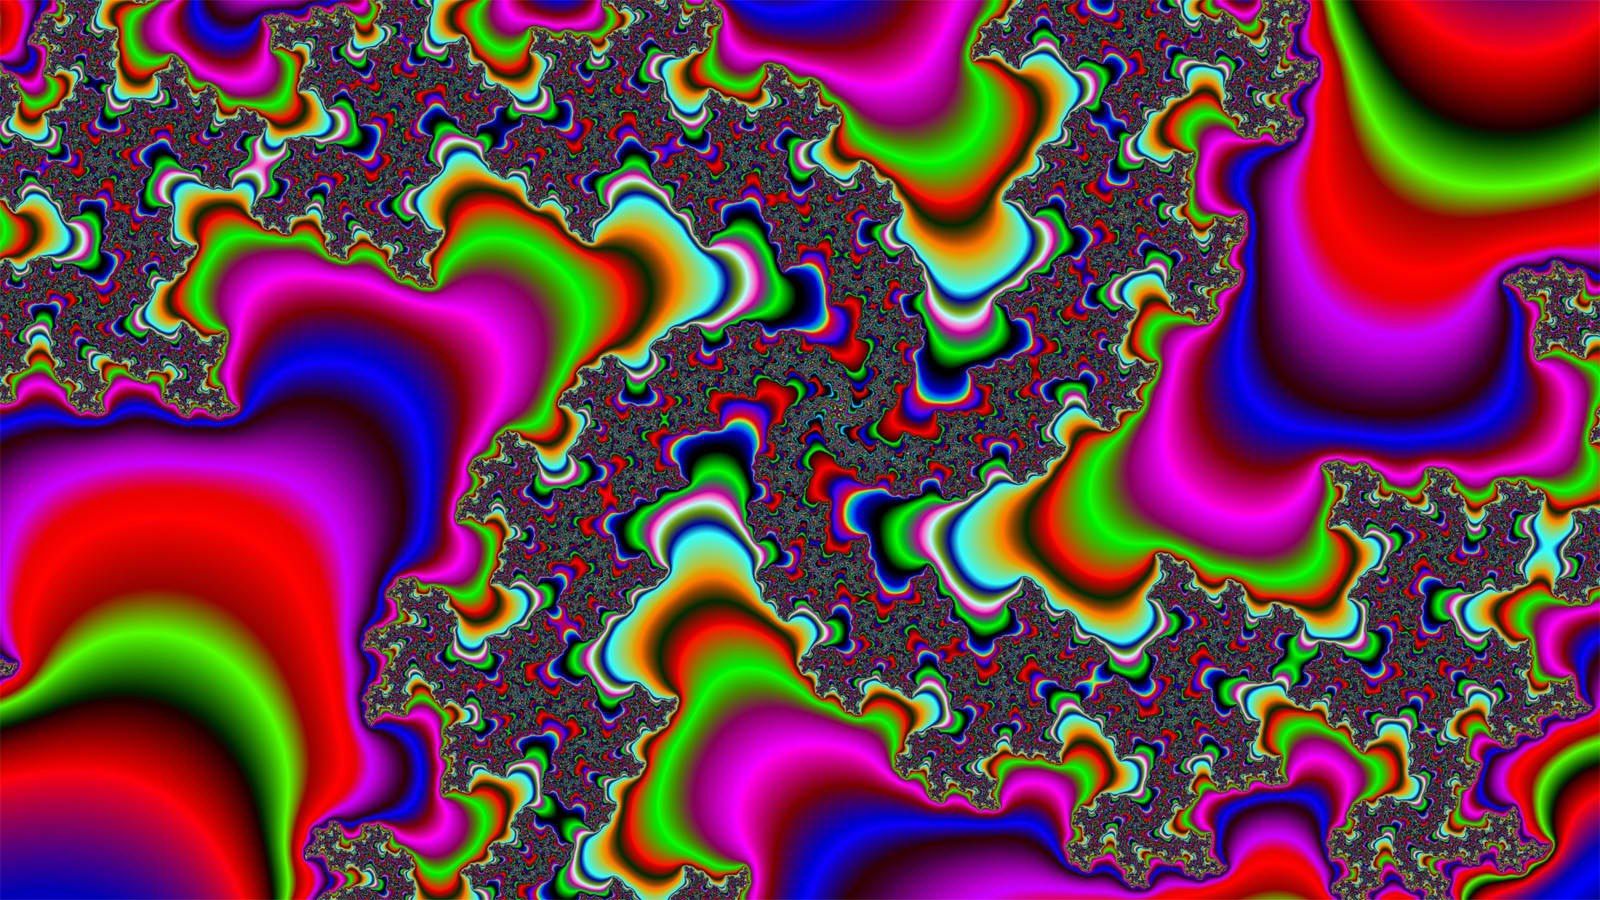 Trippy colorful wallpaper 1600x900 - (#33383) - High Quality and ...